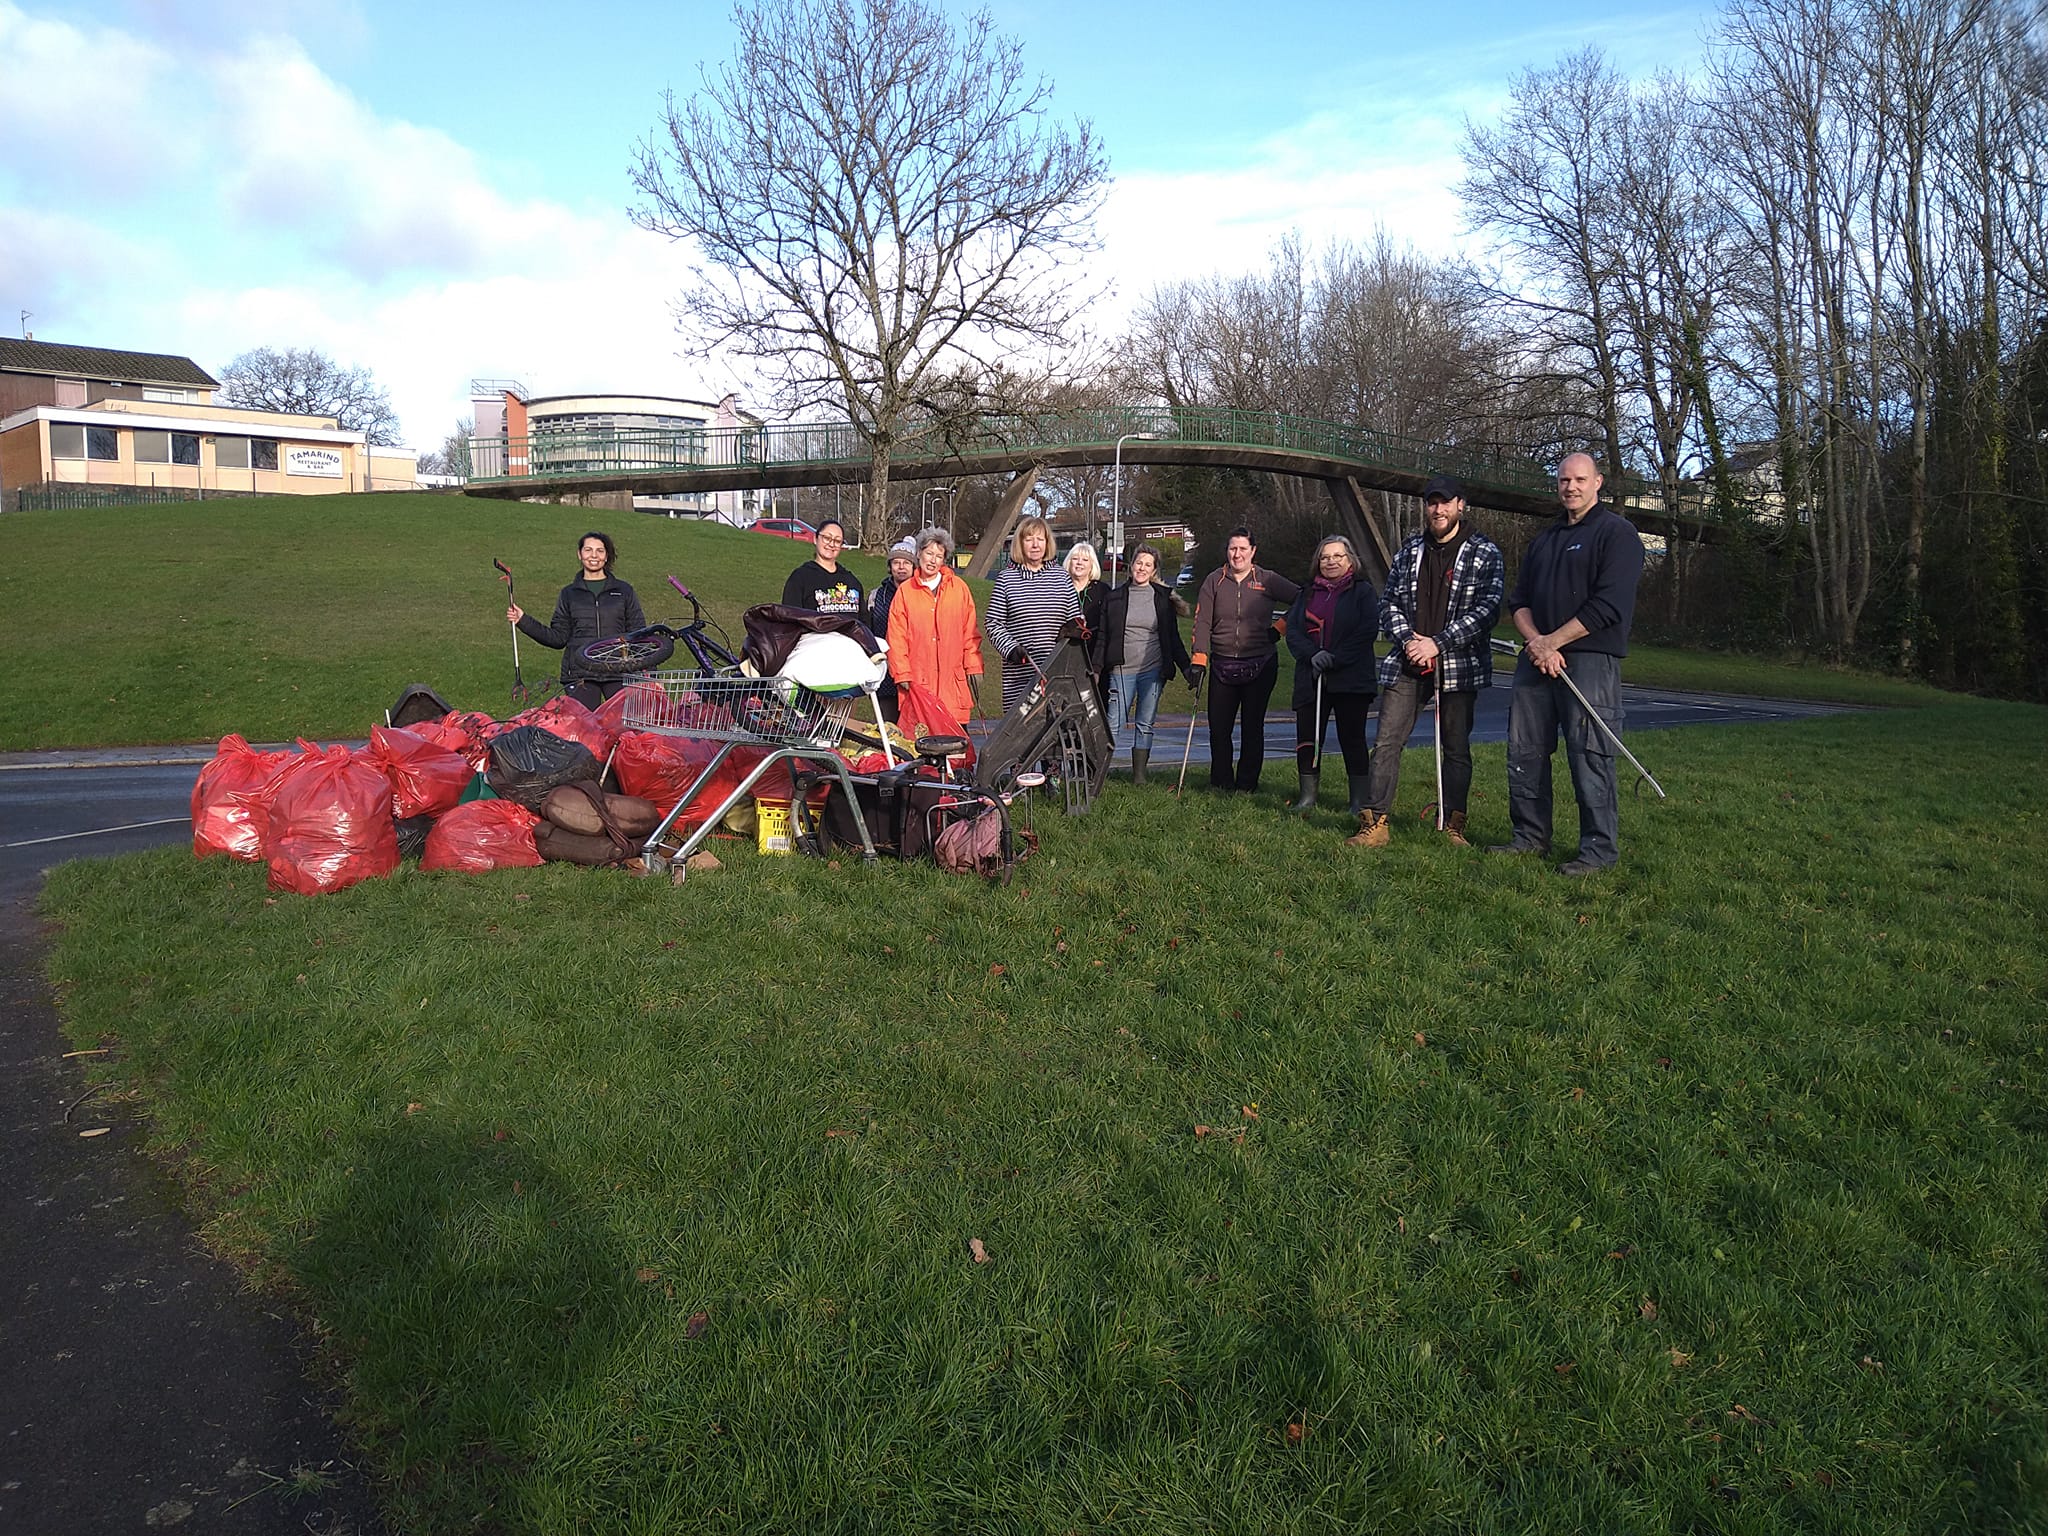 A group of litter pickers